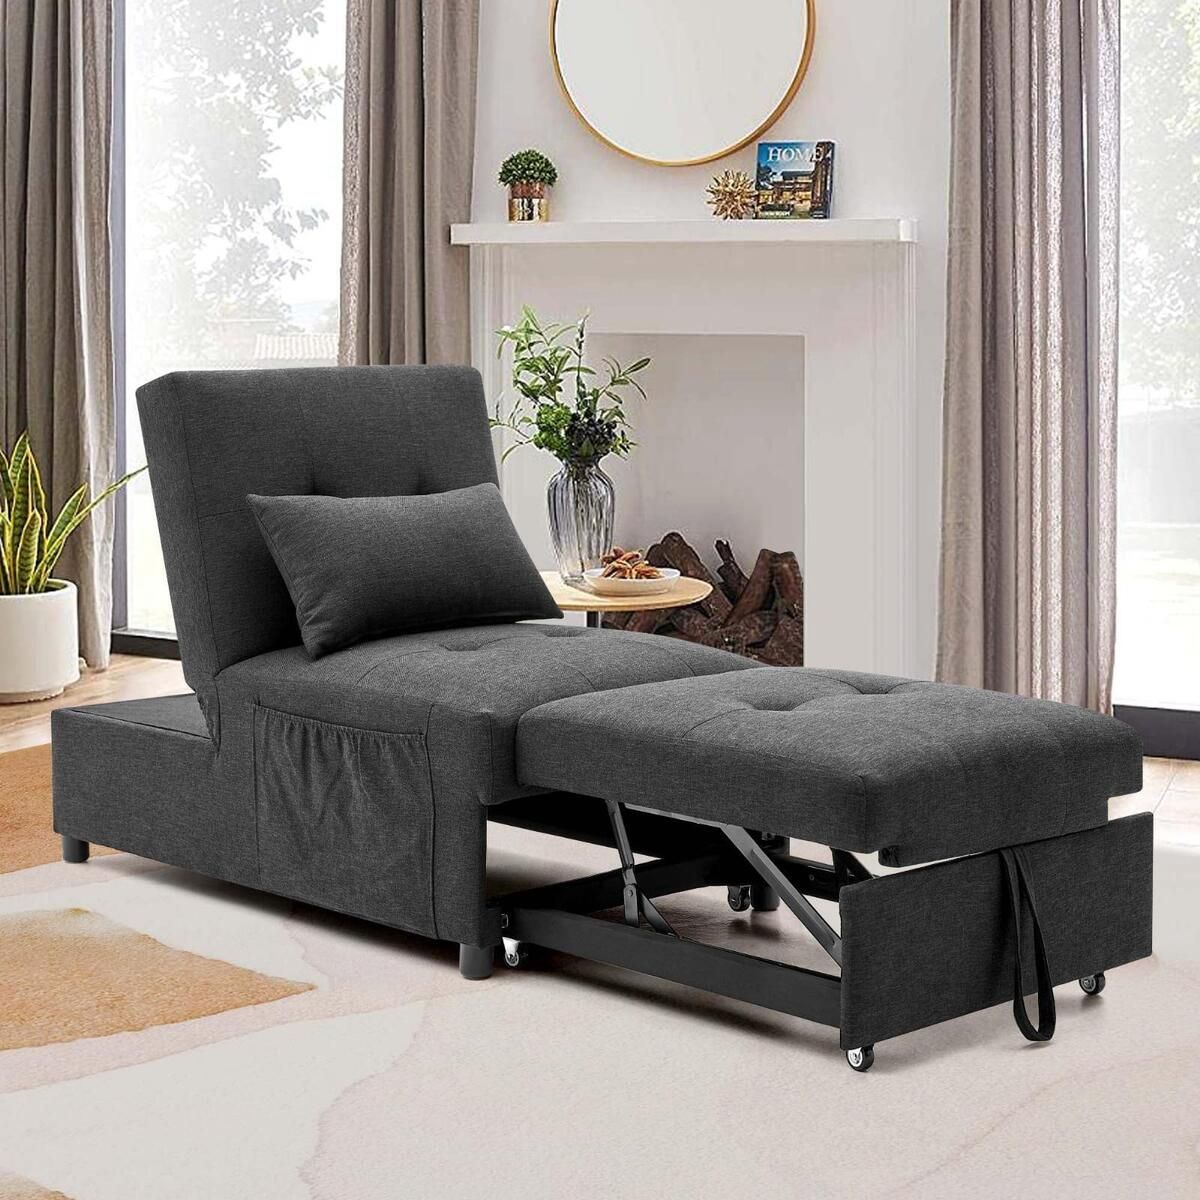 Convertible Sofa Chair Futon Bed 4 In 1 Pull Out Sleeper Chaise Home  Furniture | Ebay With Regard To 4 In 1 Convertible Sleeper Chair Beds (Photo 3 of 15)